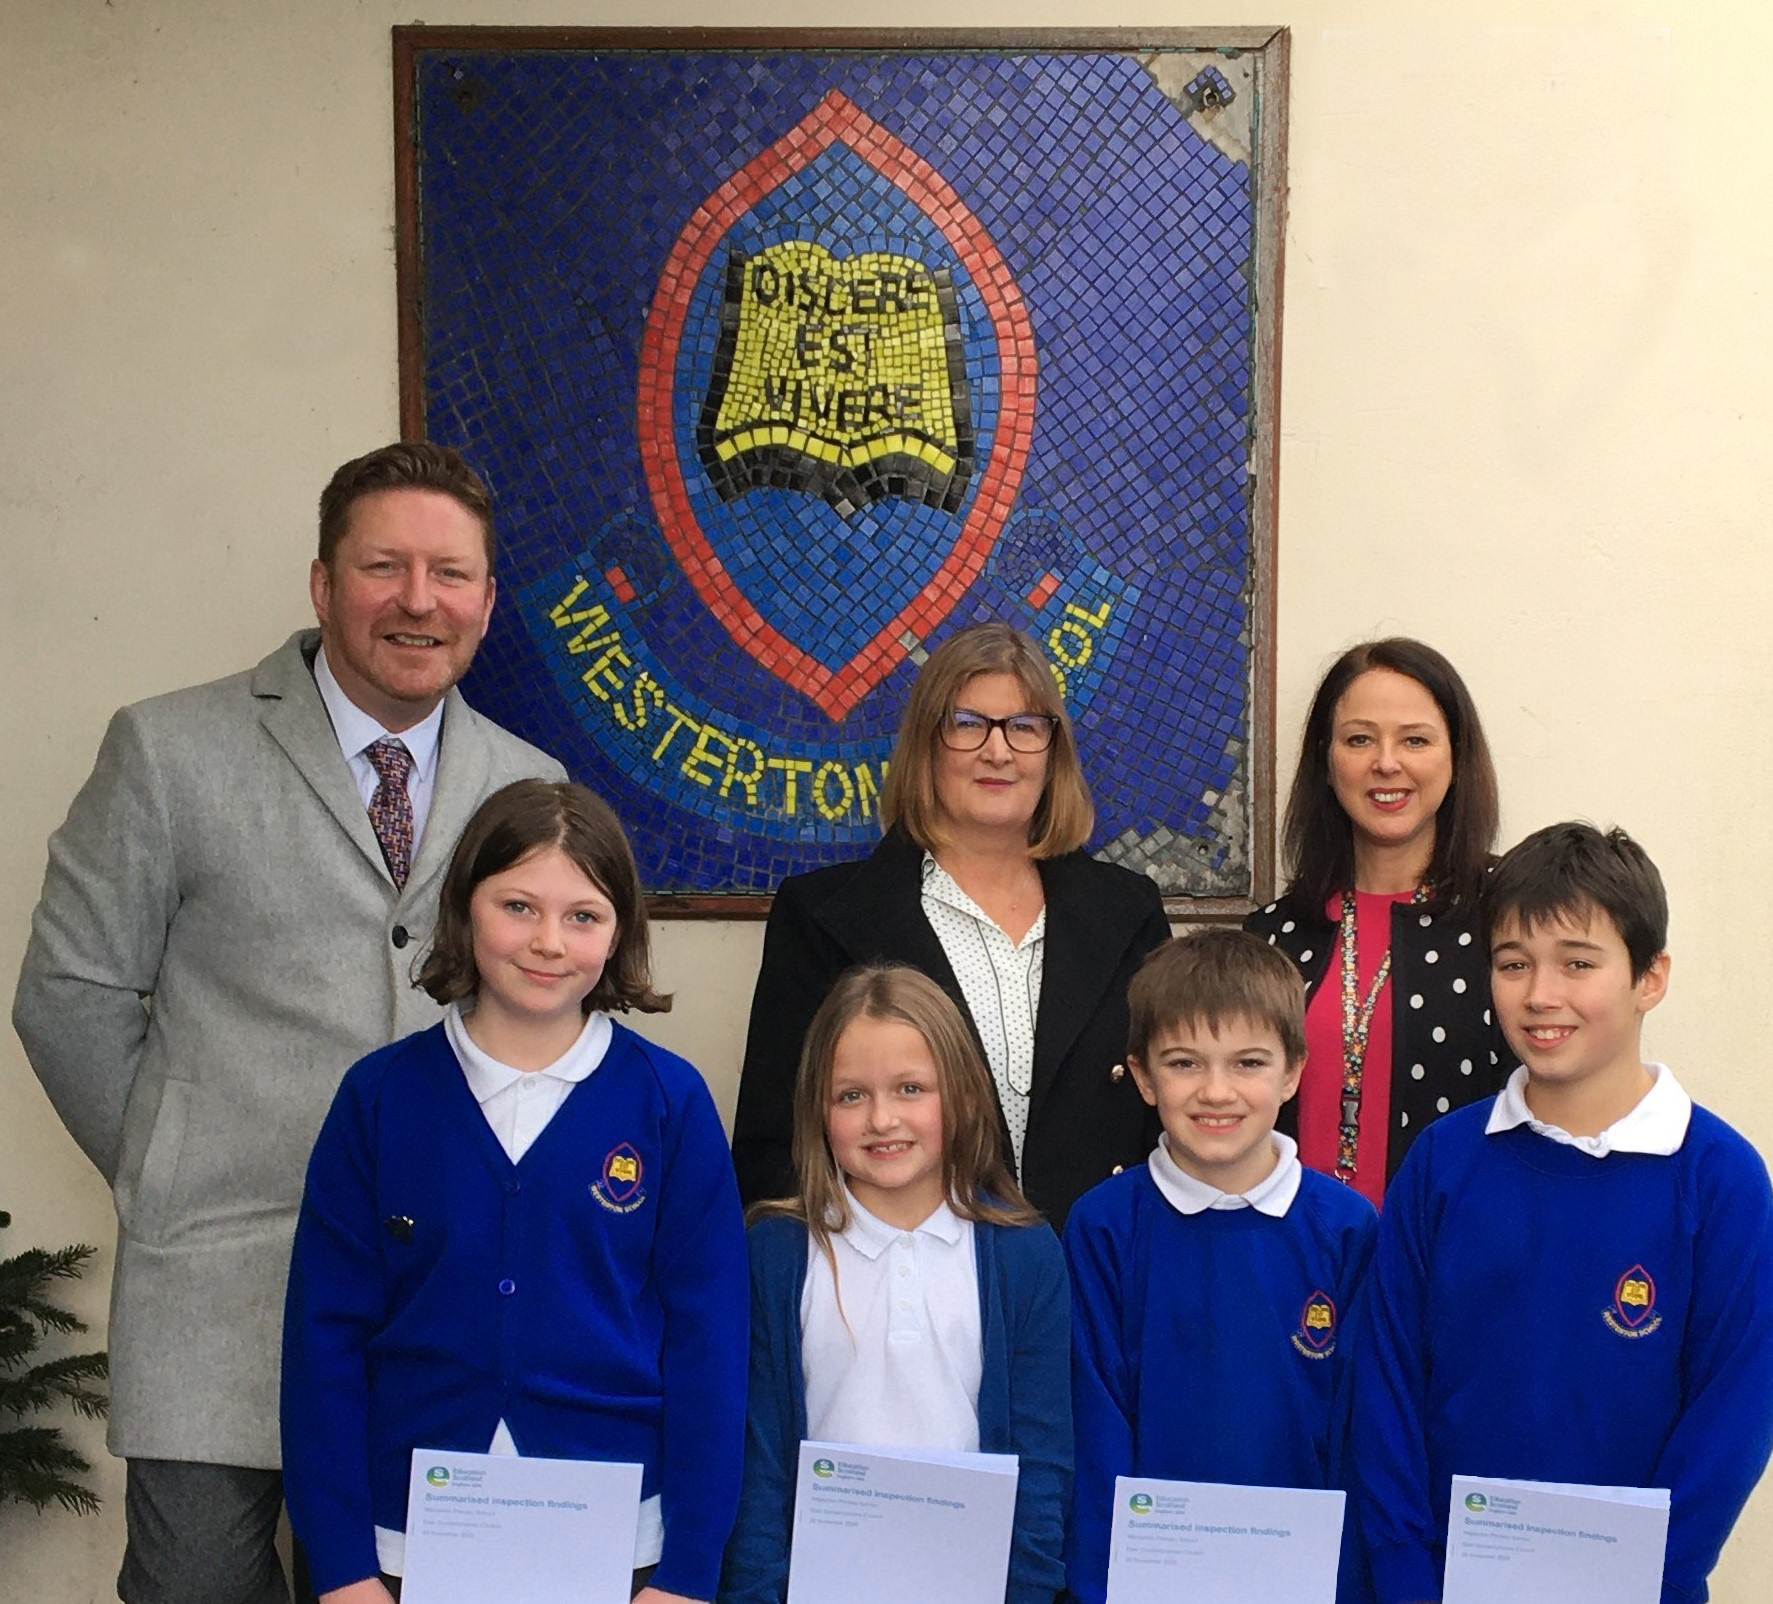 westerton pupils with councillor, inspector and teacher following positive inspection report